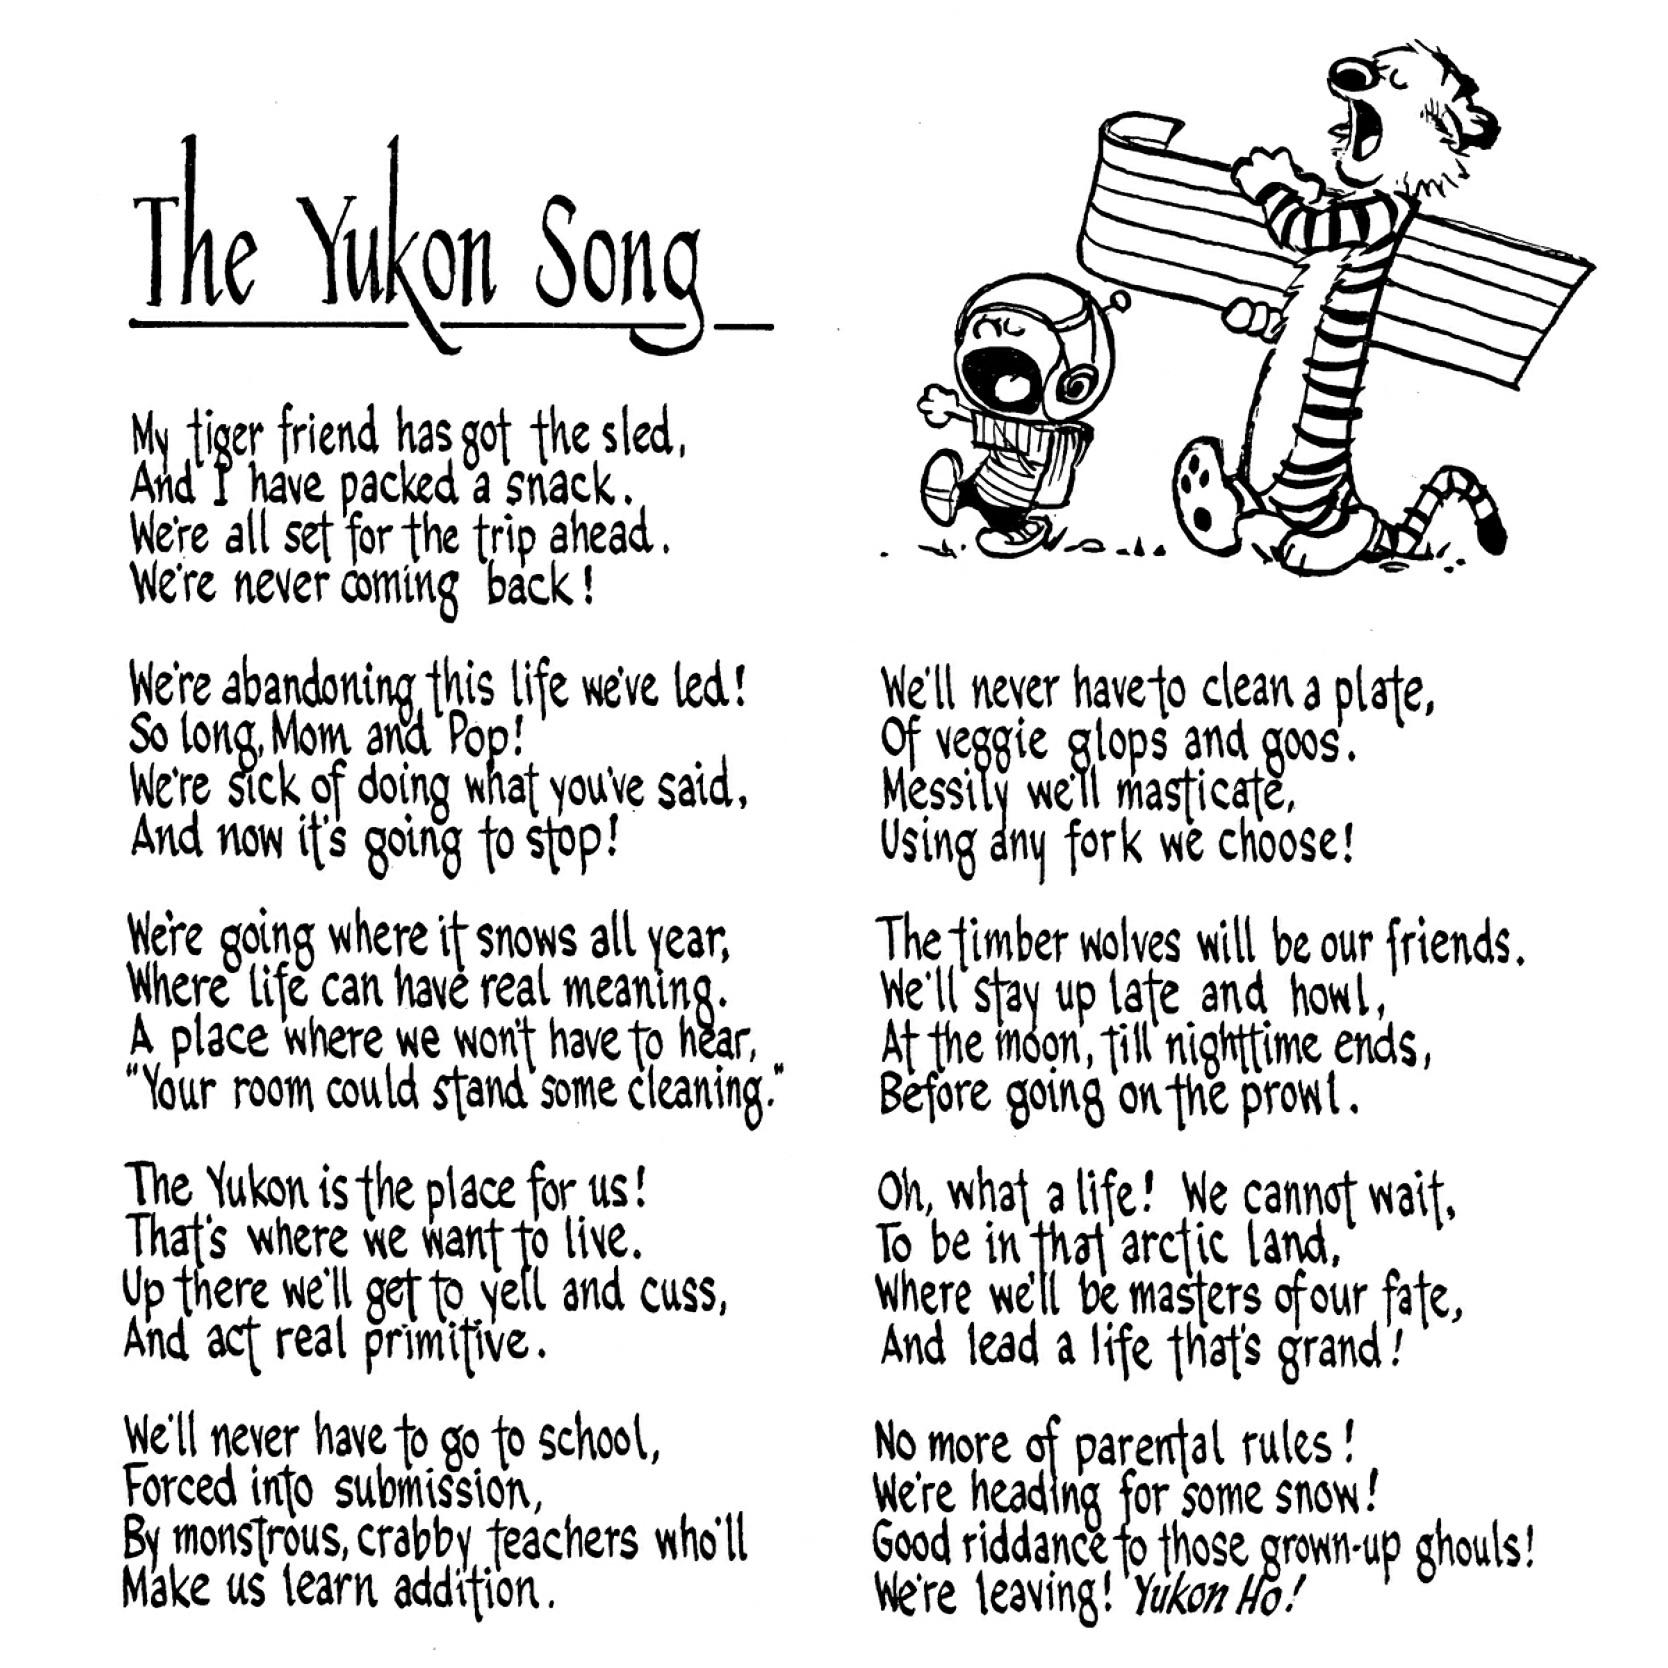 “The Yukon Song” from Calvin and Hobbes, by Bill Watterston